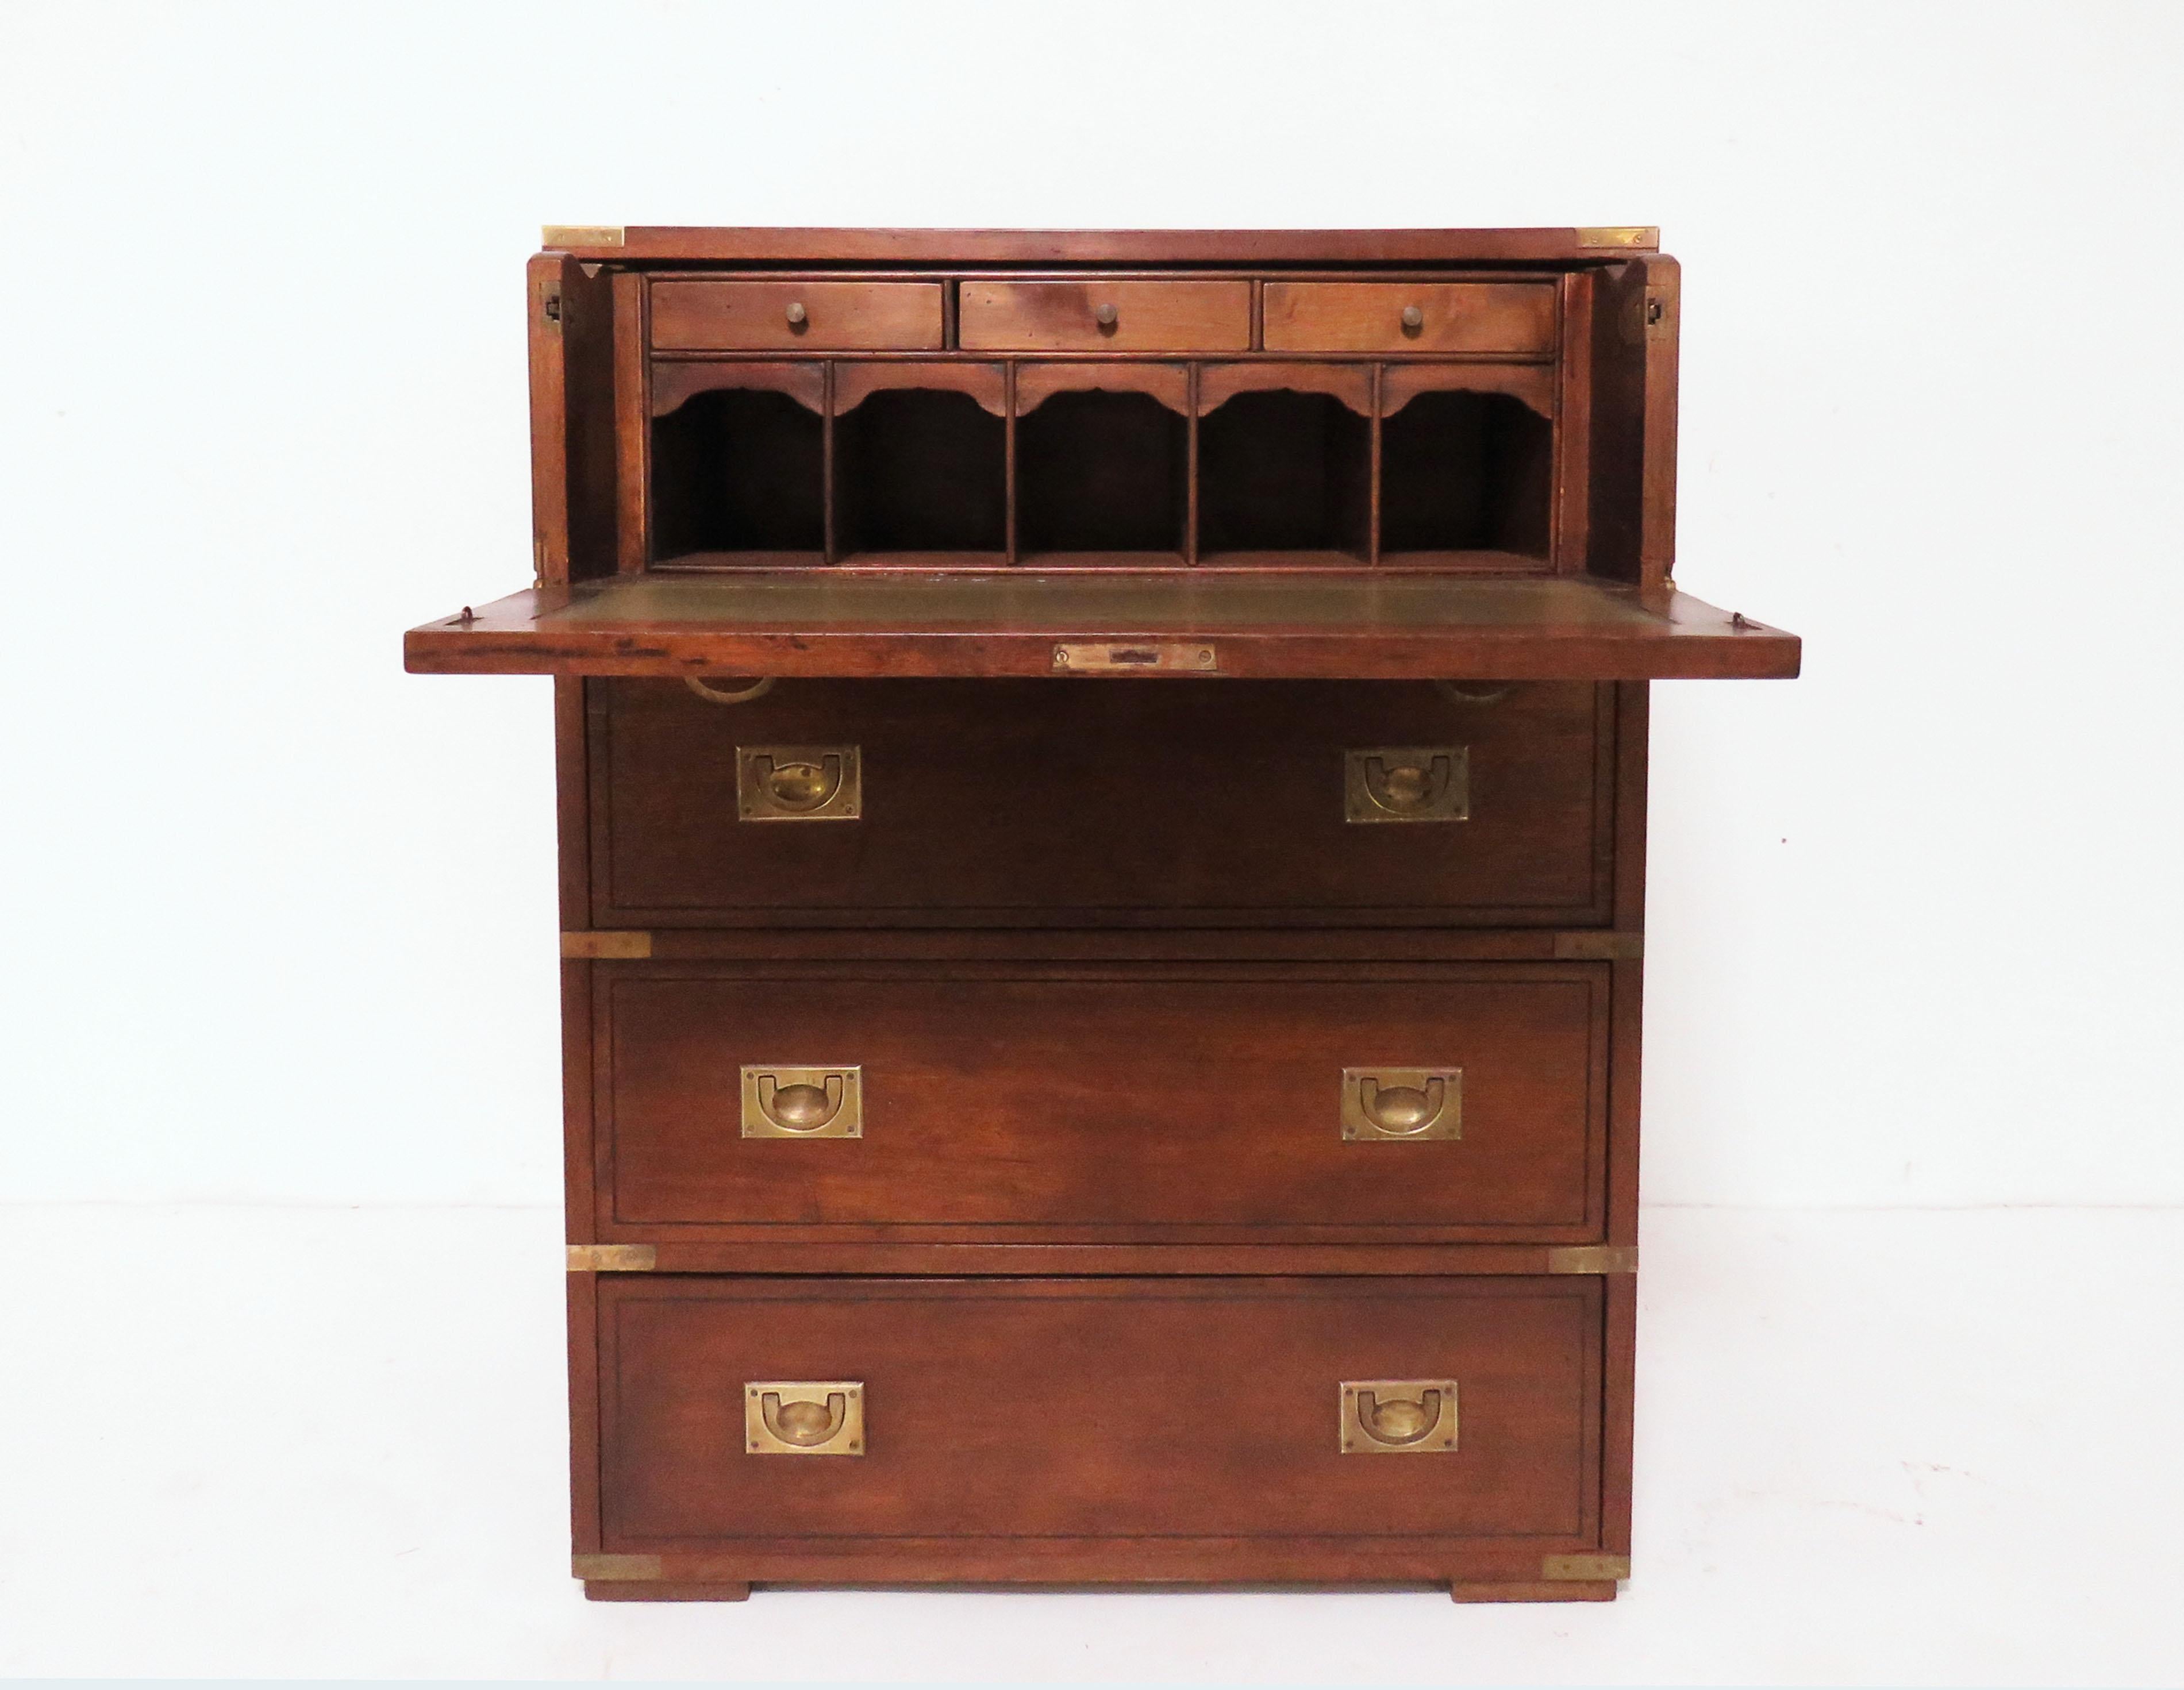 Antique English solid mahogany officer’s campaign chest with drop down desktop drawer, circa 1890s. Leather writing surface, storage drawers, brass hardware and carry handles. Closed size 36.25” high, 15.5” deep, 28.25” wide. 27.75” deep with